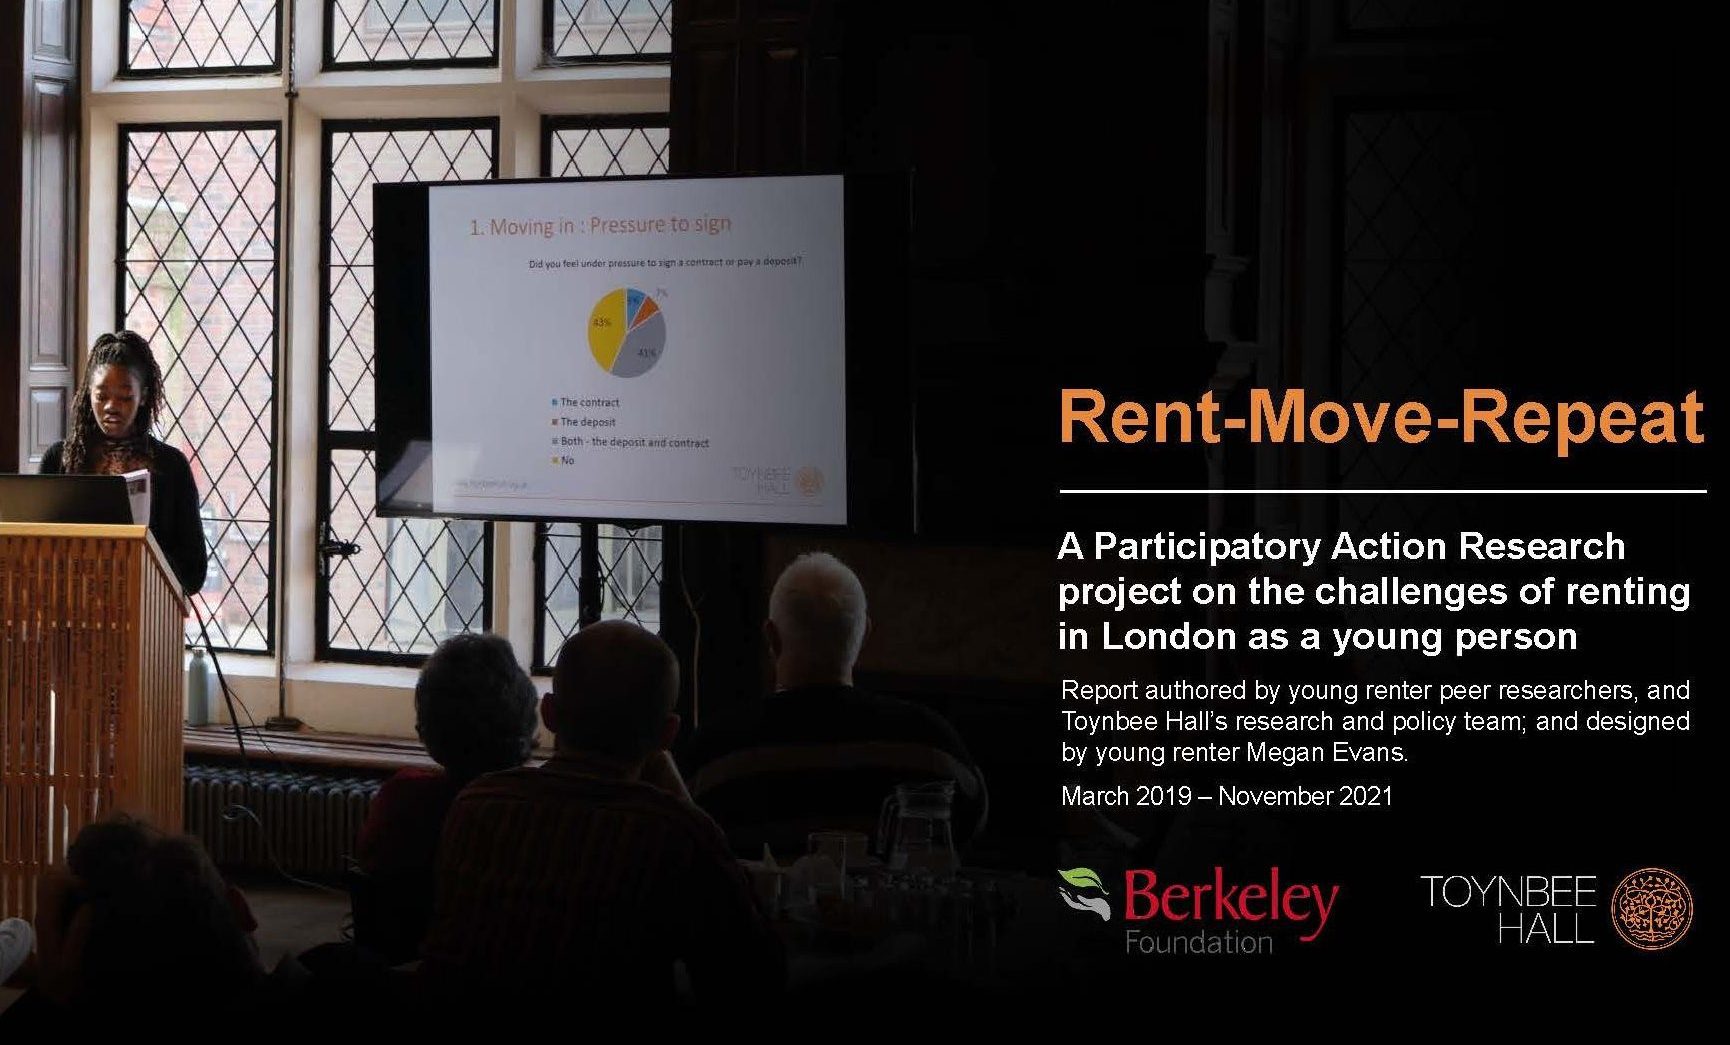 Rent-Move-Repeat young renters report